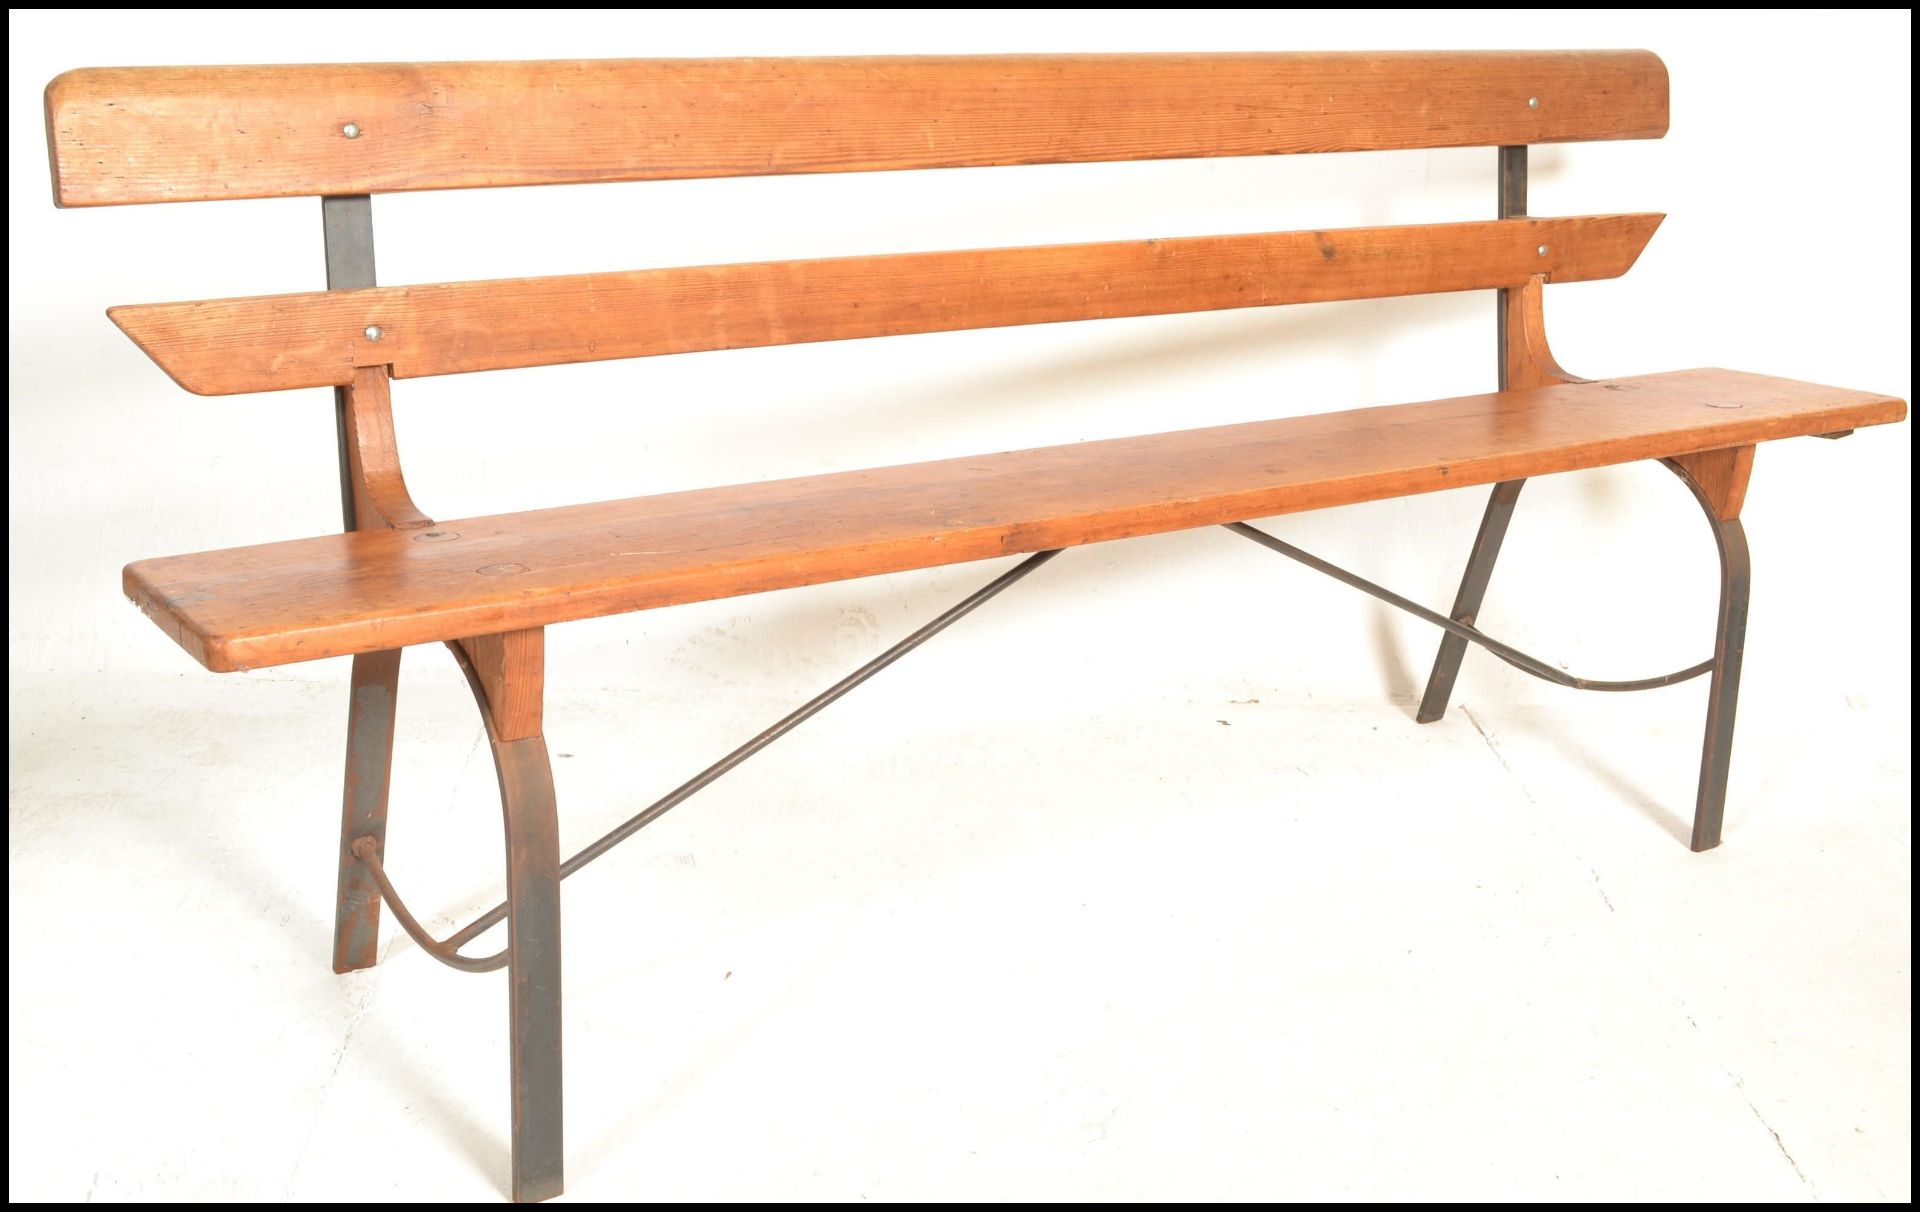 A 20th Century Victorian style pine station bench, raised on upright metal supports with plank